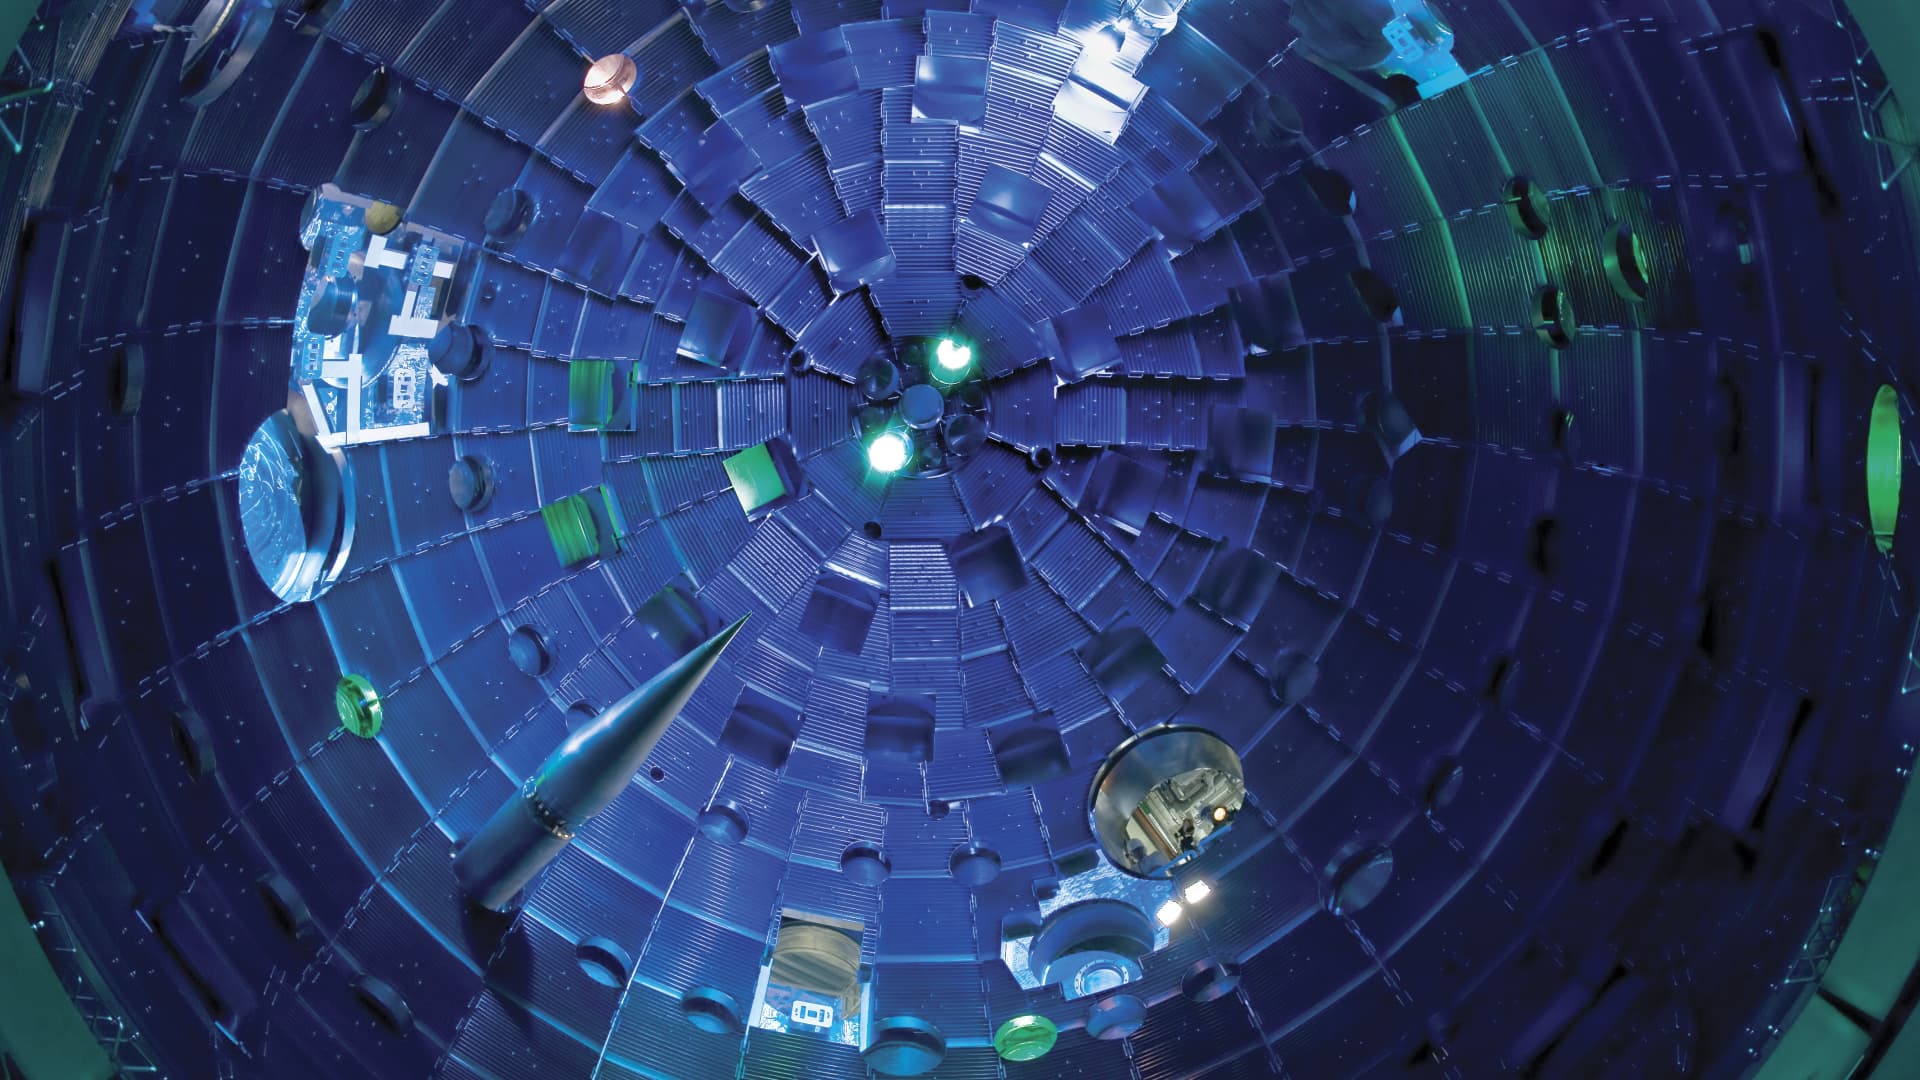 Inside the Target Chamber where the fusion reactions occur at the National Ignition Facility at the Lawrence Livermore National Laboratory in Livermore, Calif.